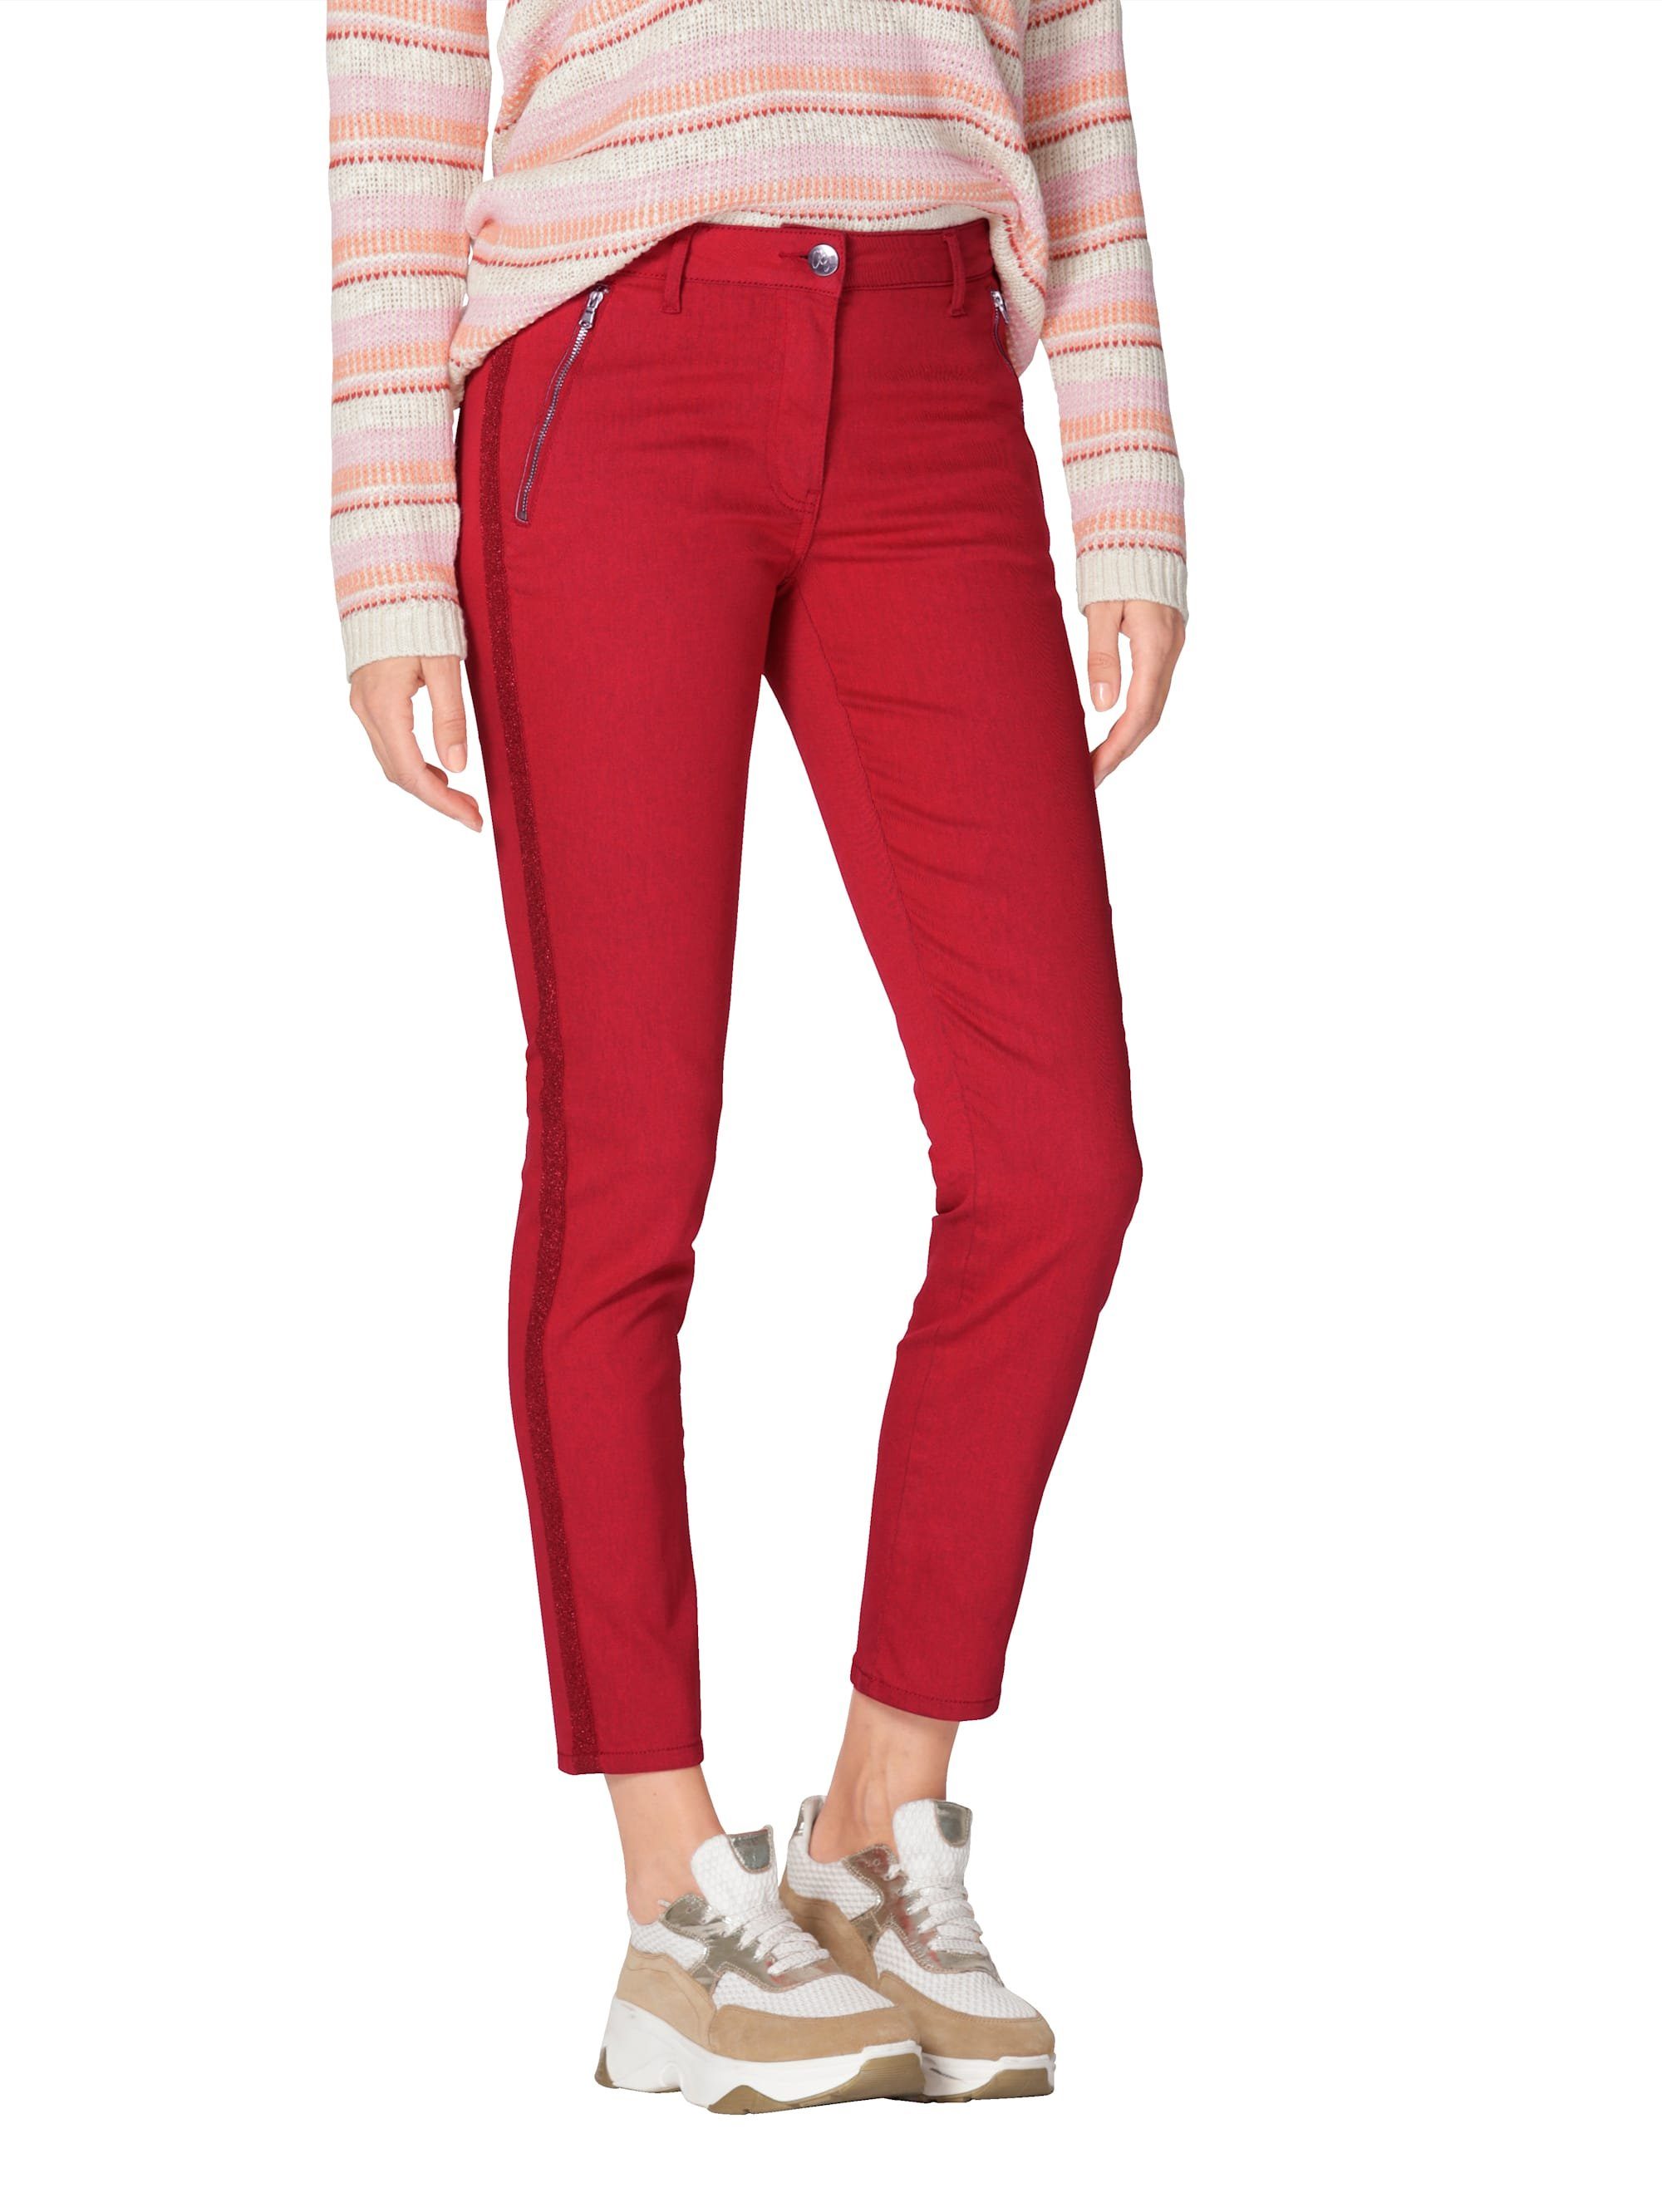 Rote 7/8-Jeans online kaufen » Rote Cropped Jeans | OTTO